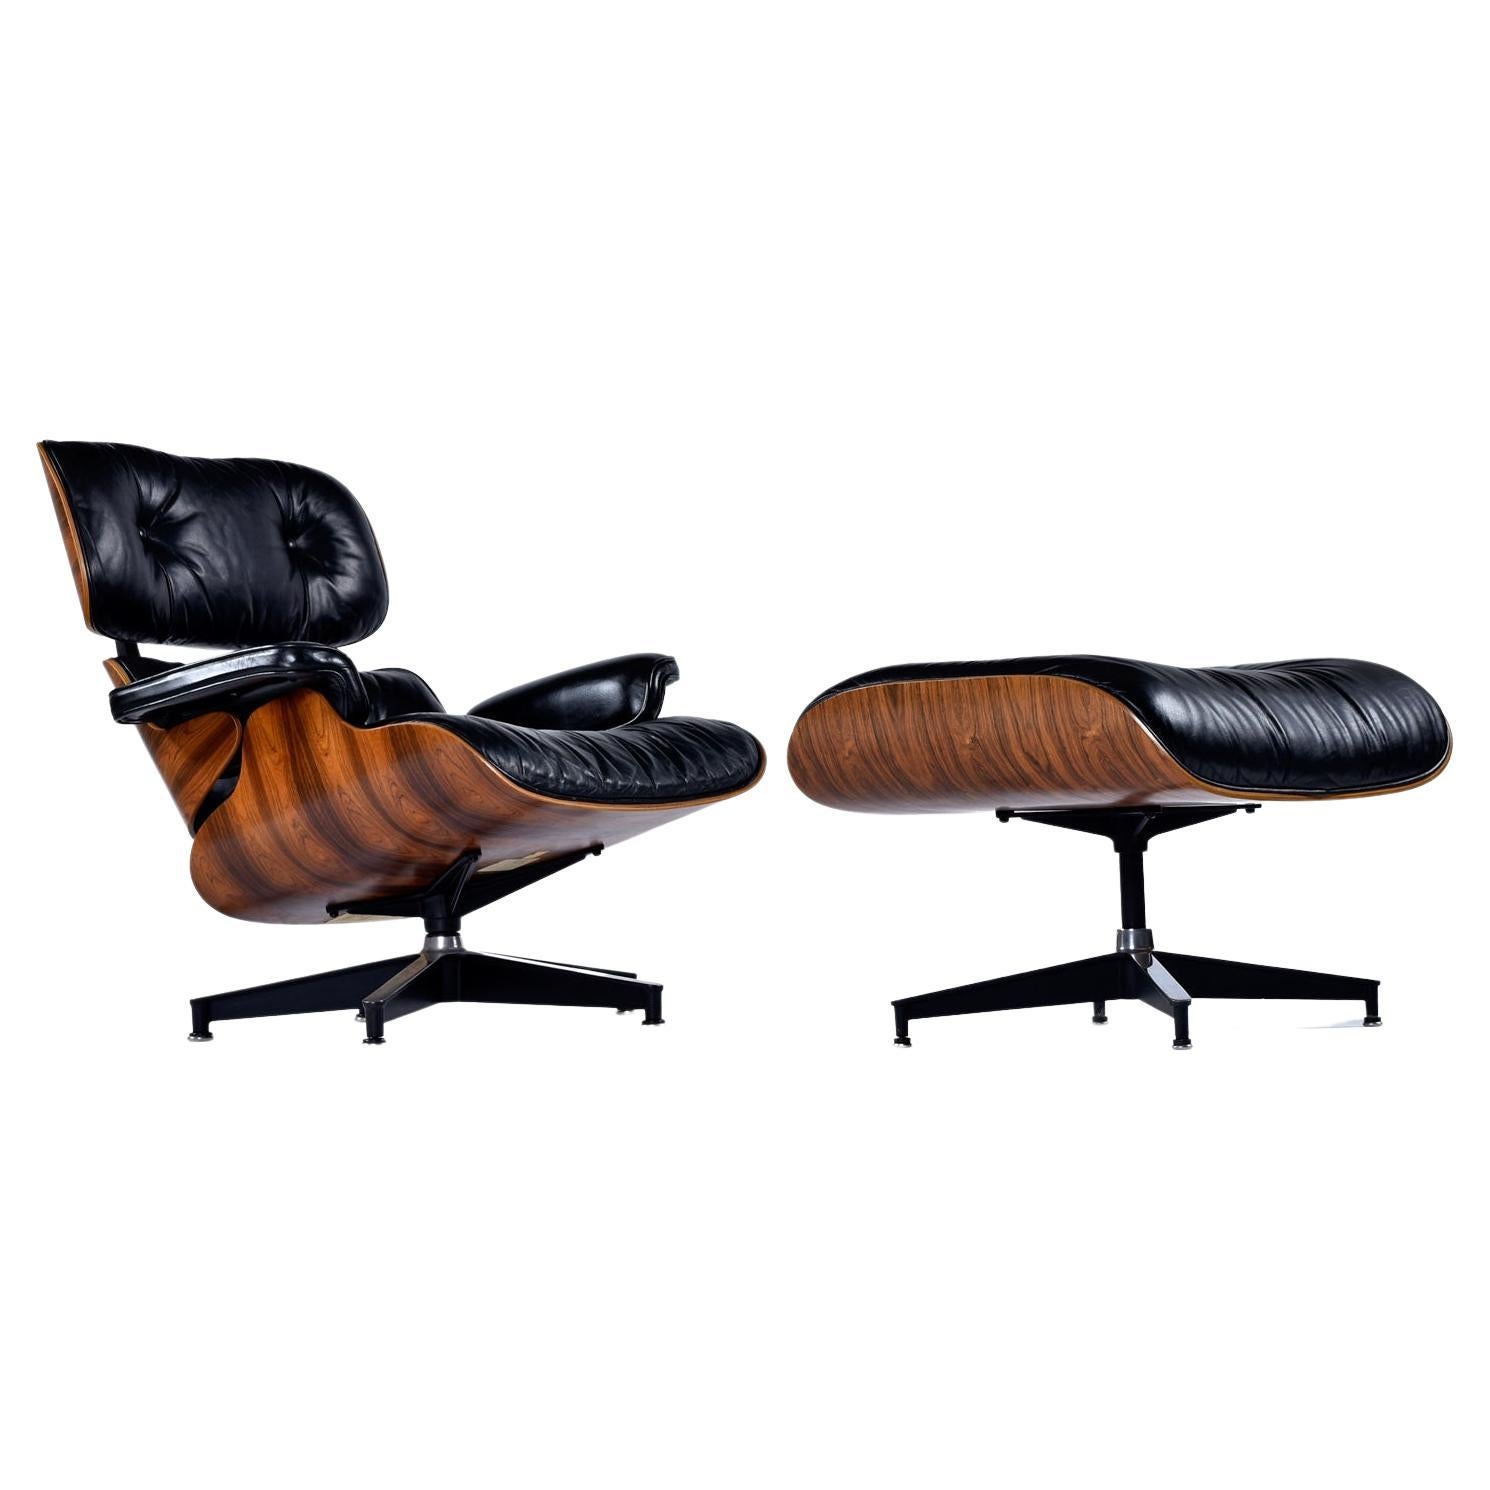 1977 Rosewood Eames Lounge Chair and Ottoman by Herman Miller in Black Leather